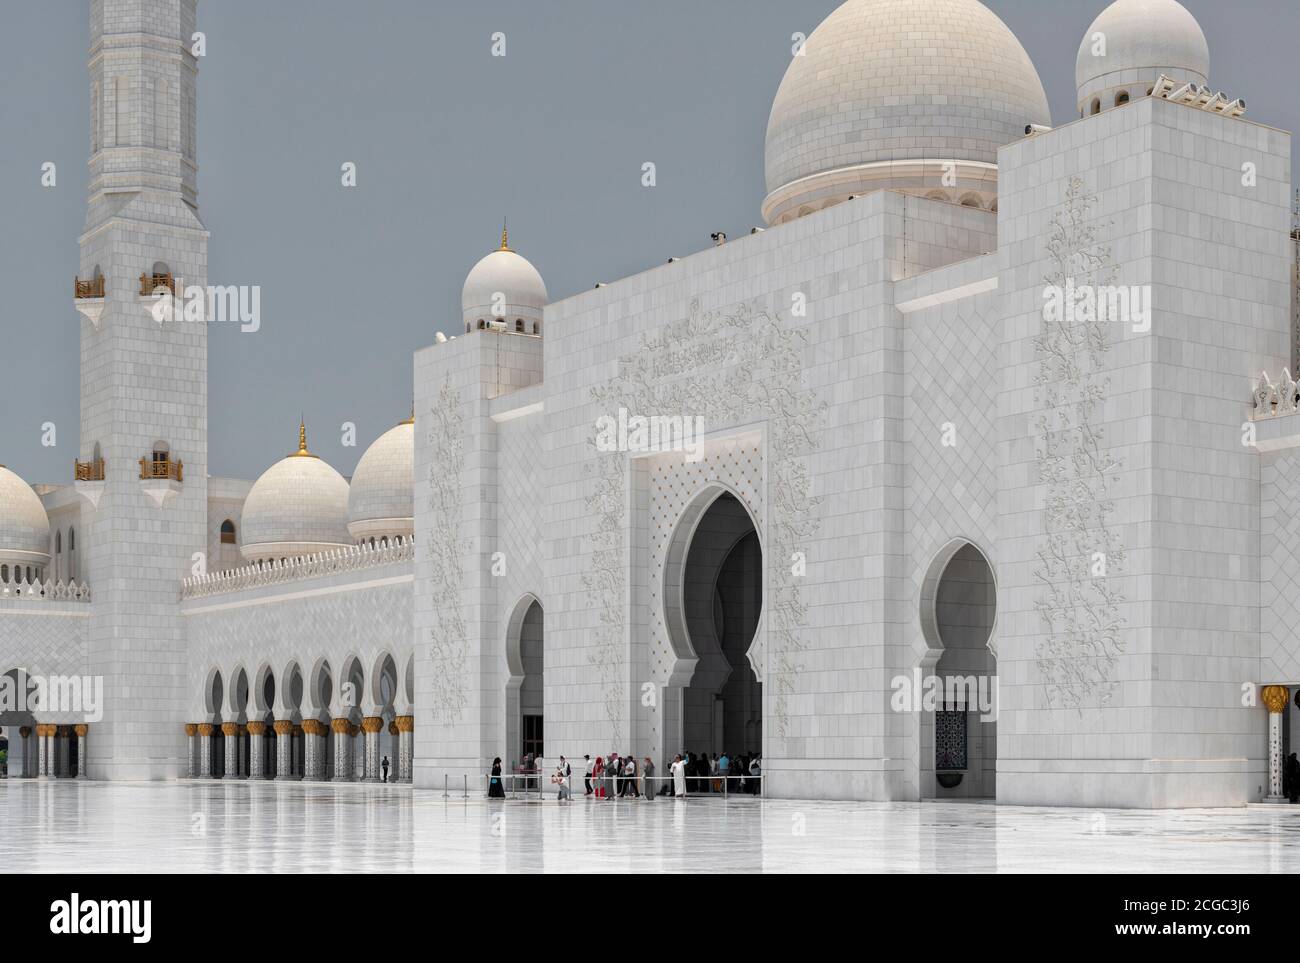 A day shot of the  Sheikh Zayed Grand Mosque, Abu Dhabi entrance and central inner courtyard, marble floor, domes, arches, columns and tourists. Mosque completed 2007. Stock Photo